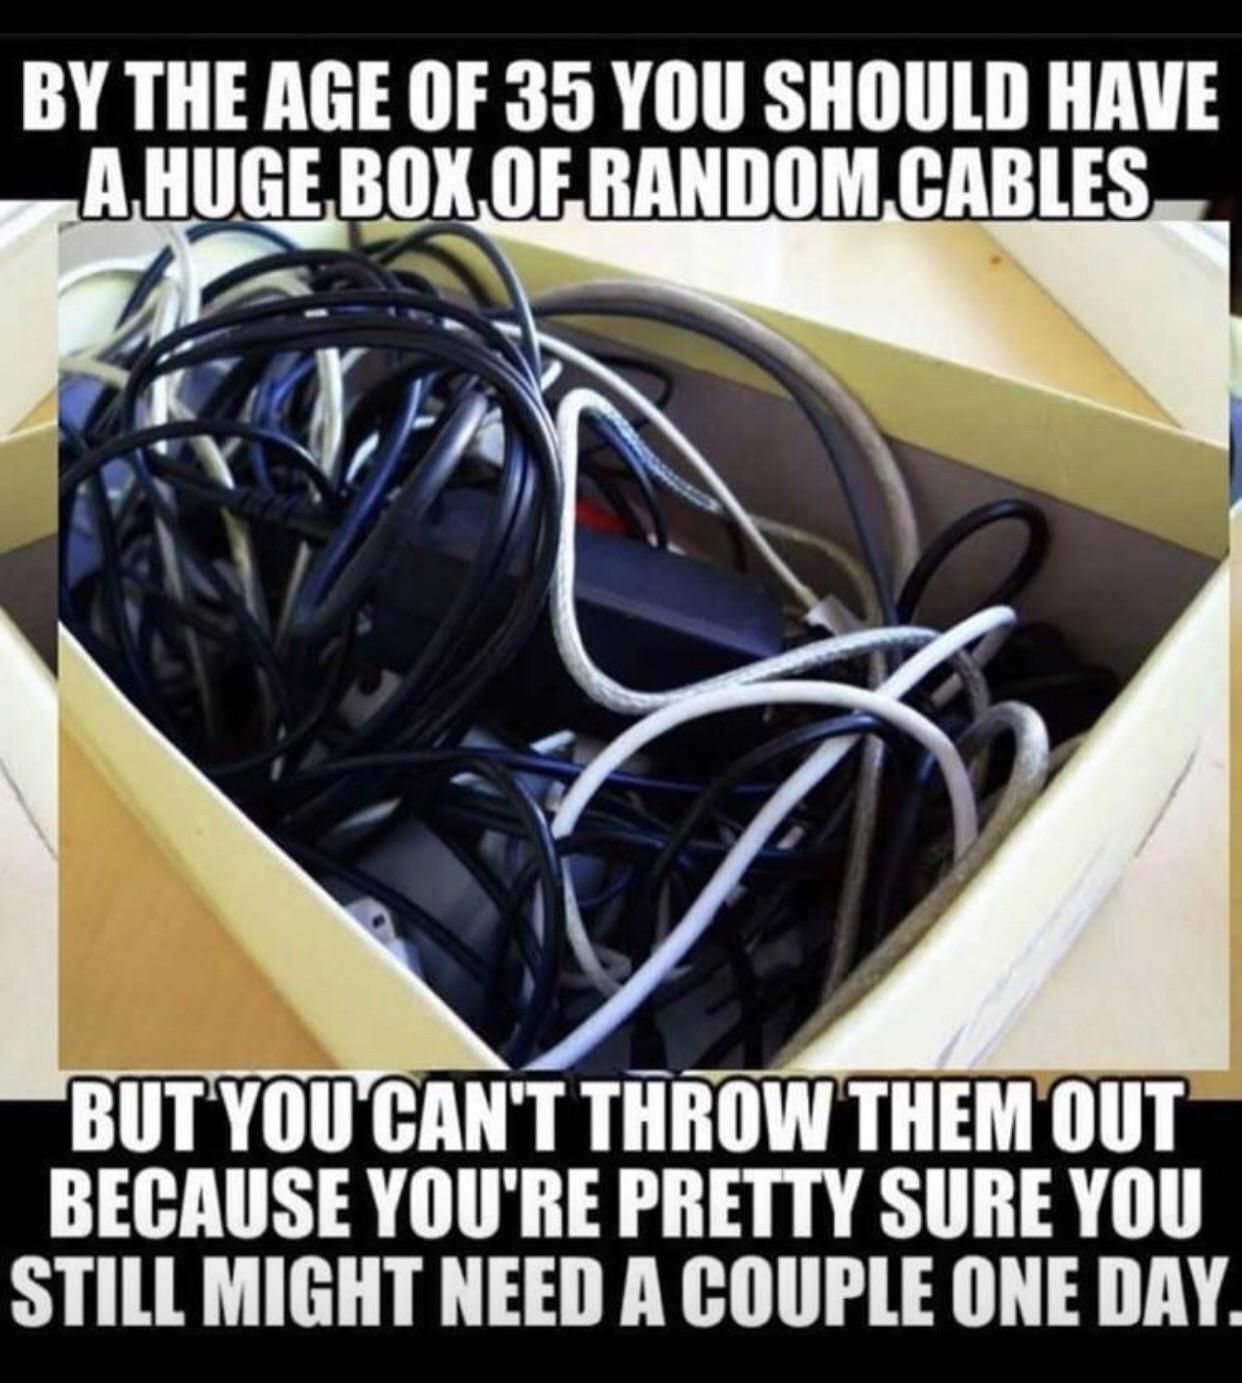 All those cables...